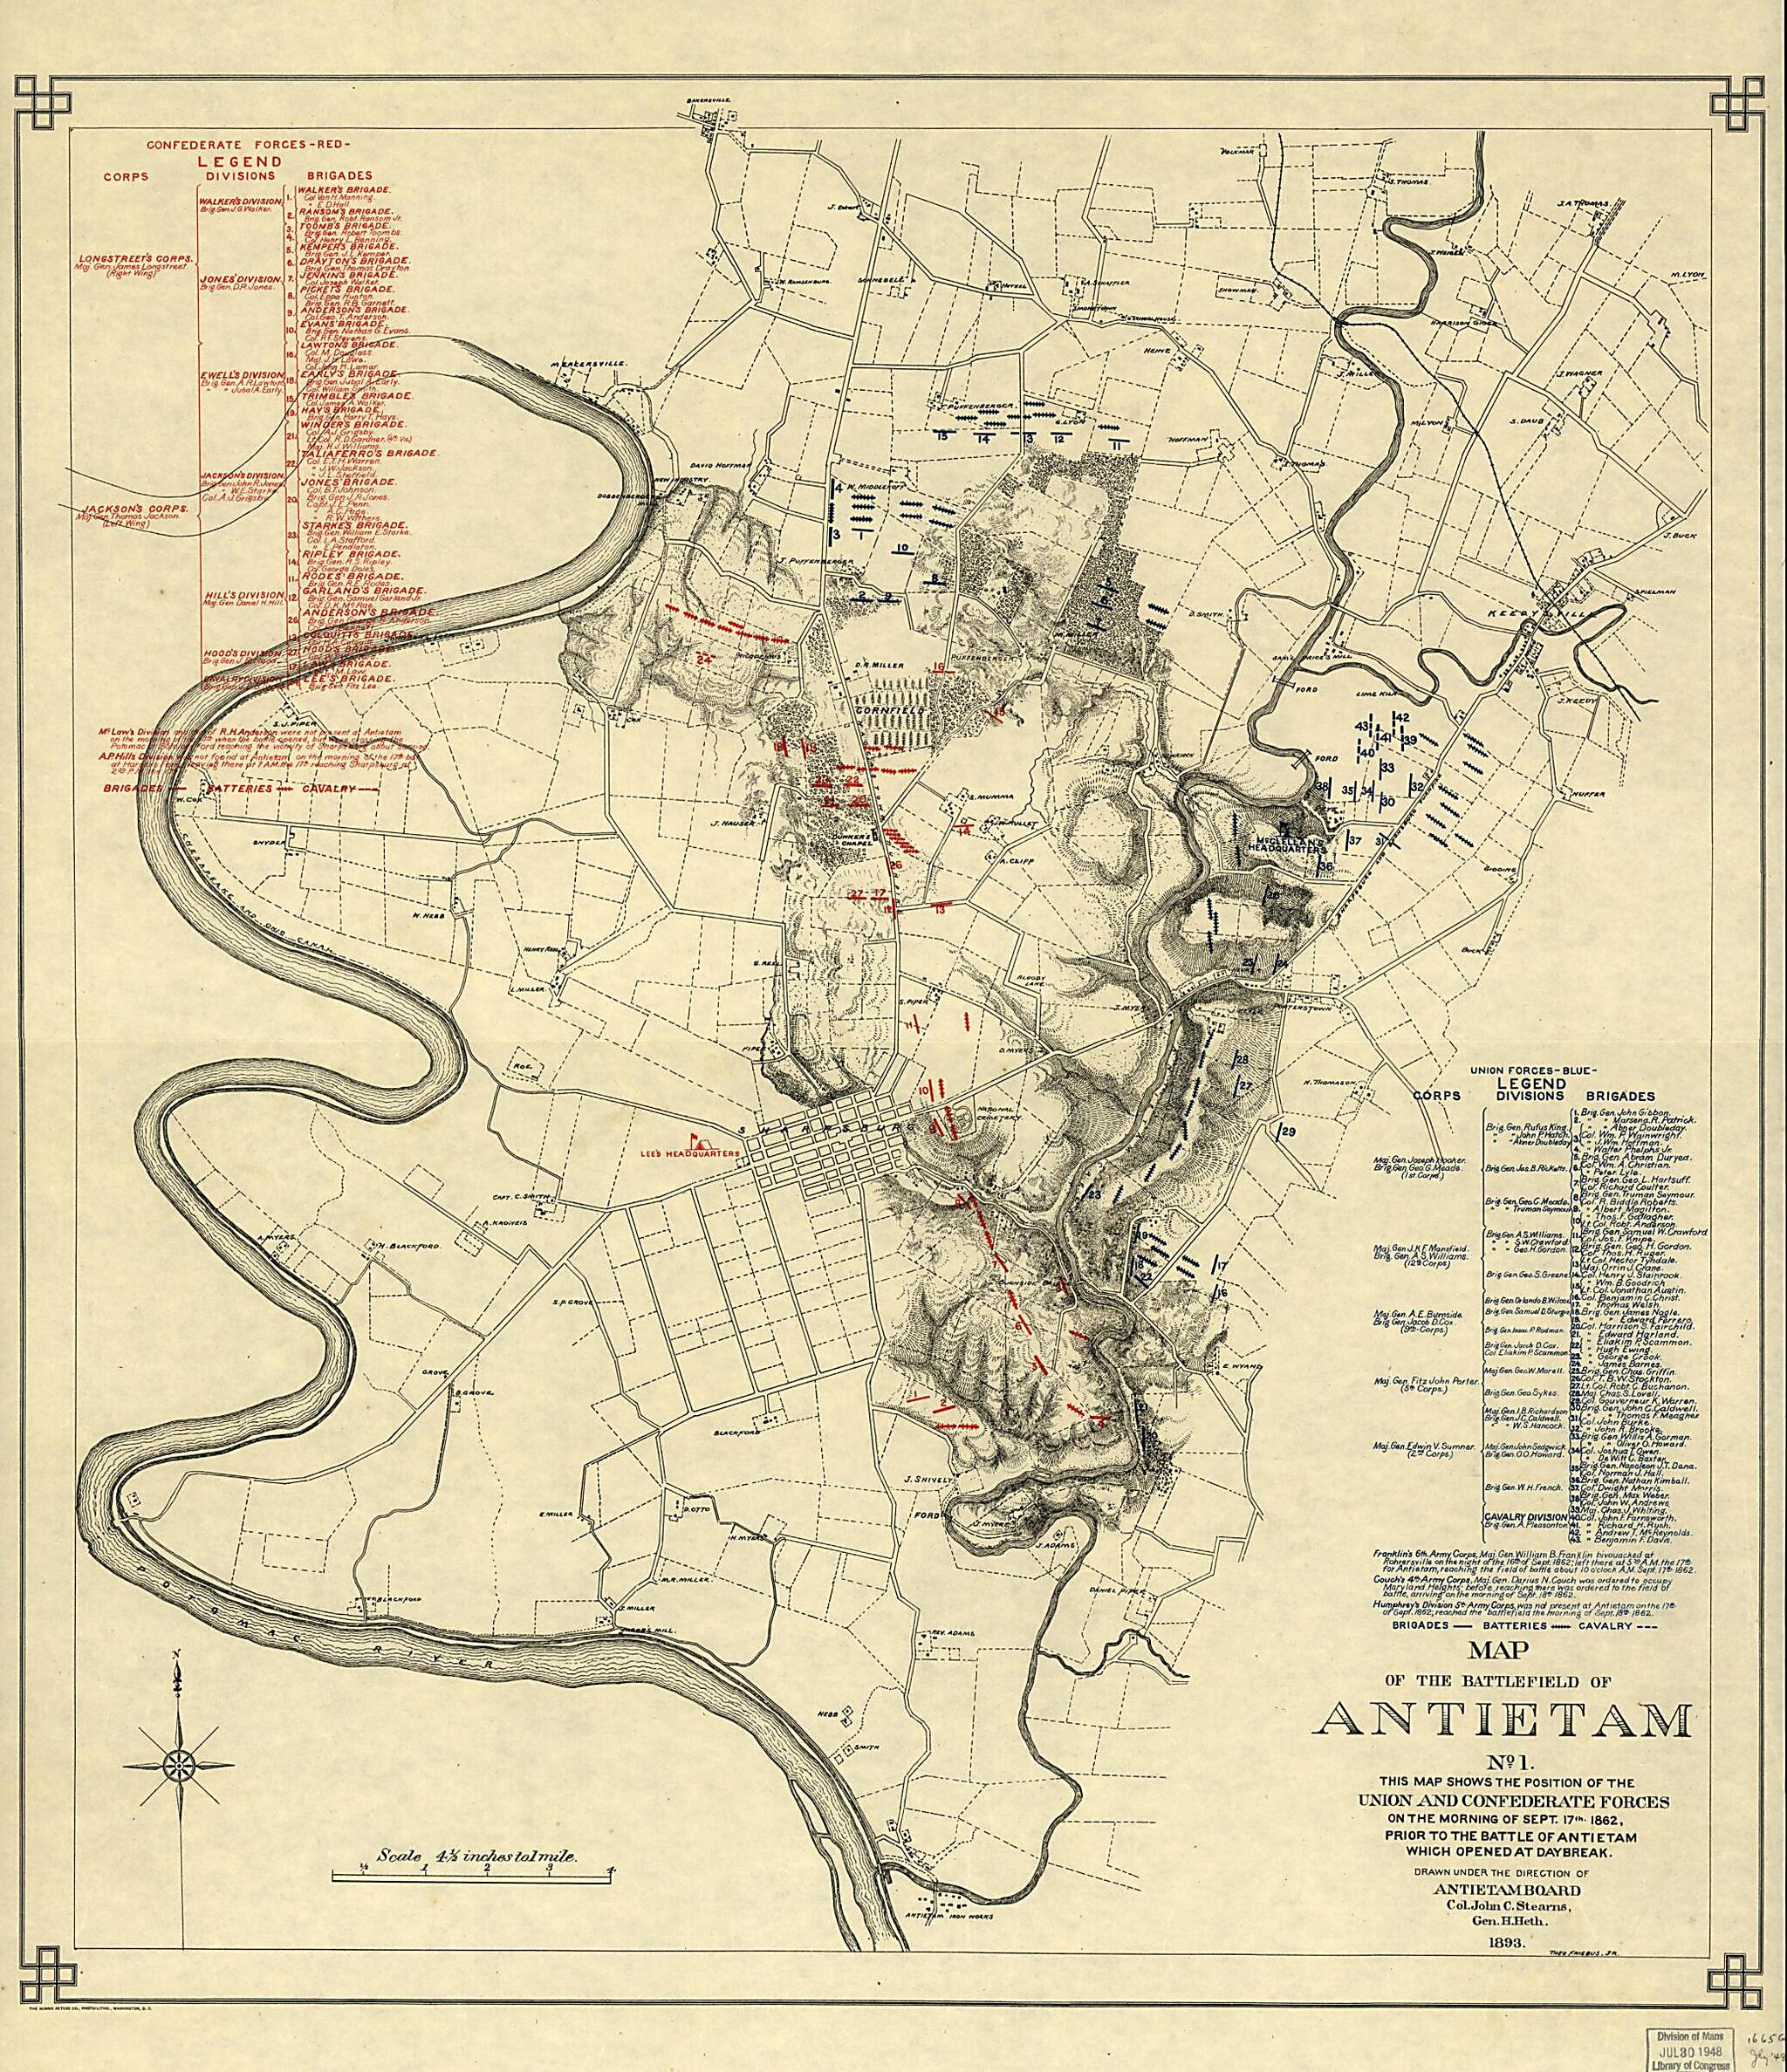 This old map of Map of the Battlefield of Antietam. No. 1. This Map Shows the Position of the Union and Confederate Forces On the Morning of Sept. 17th, 1862, Prior to the Battle of Antietam Which Opened at Daybreak from 1893 was created by  Antietam Bat